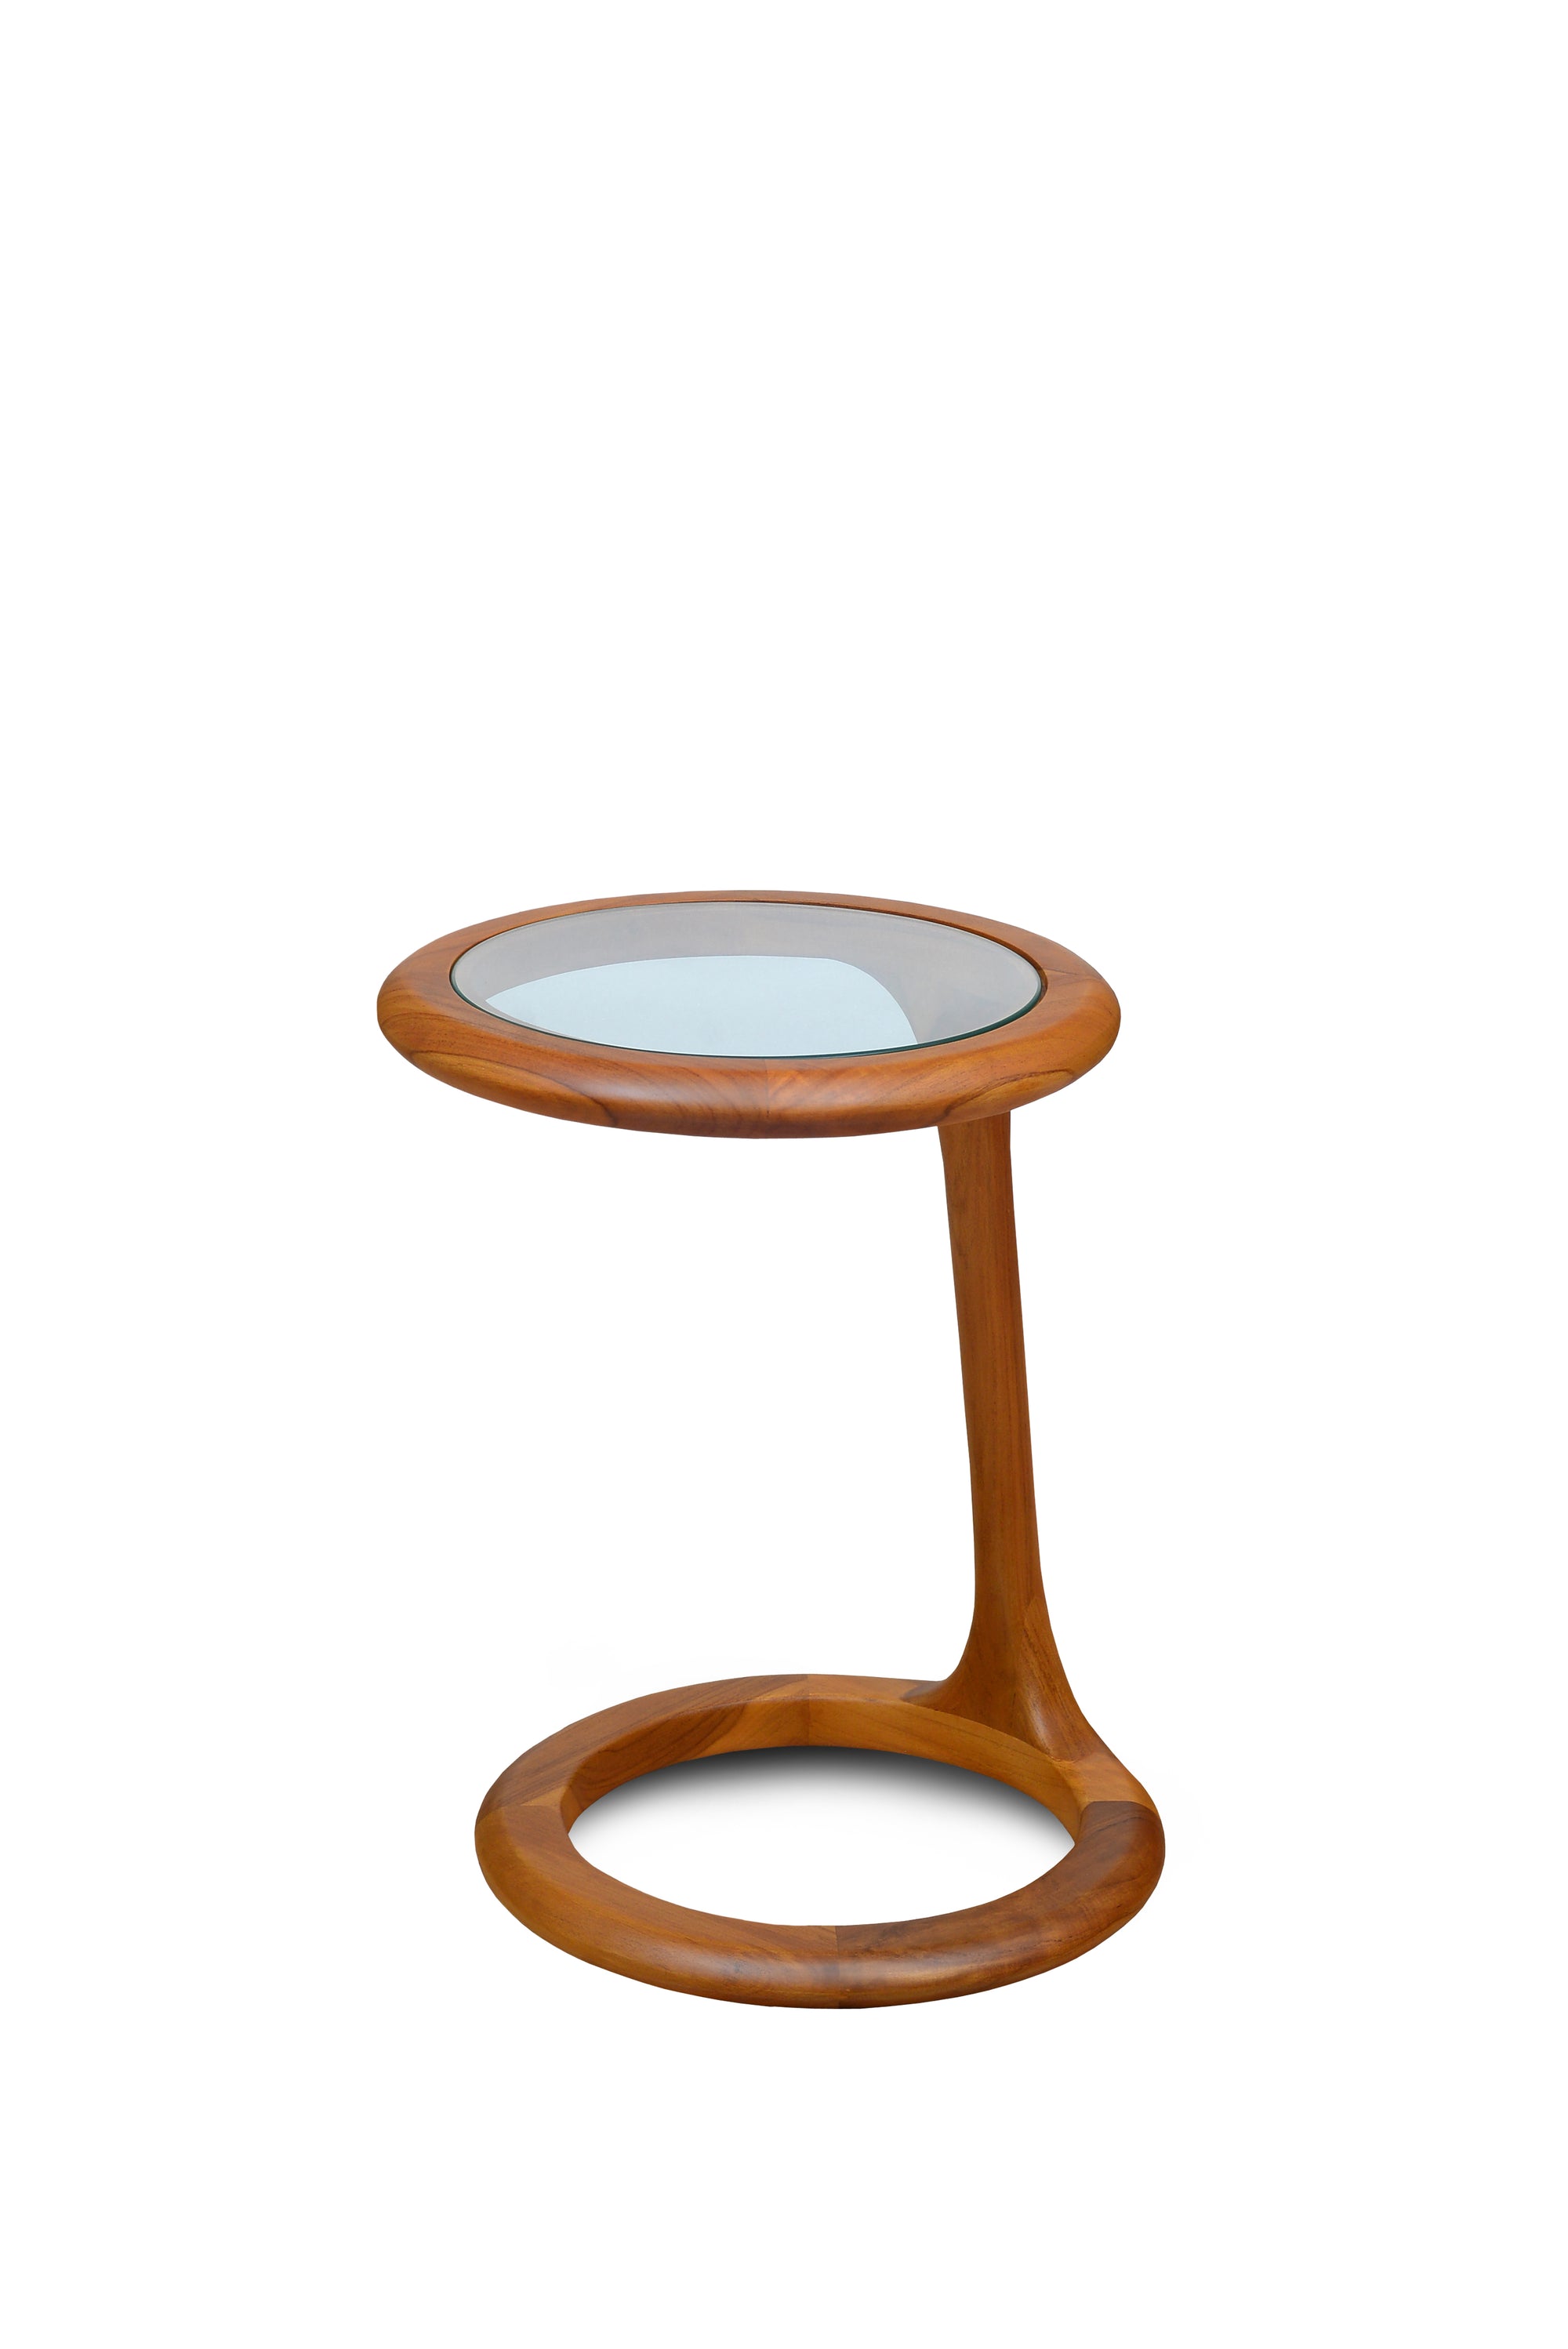 Nido Low Table Teak with Glass Top in Candy Brown Finish